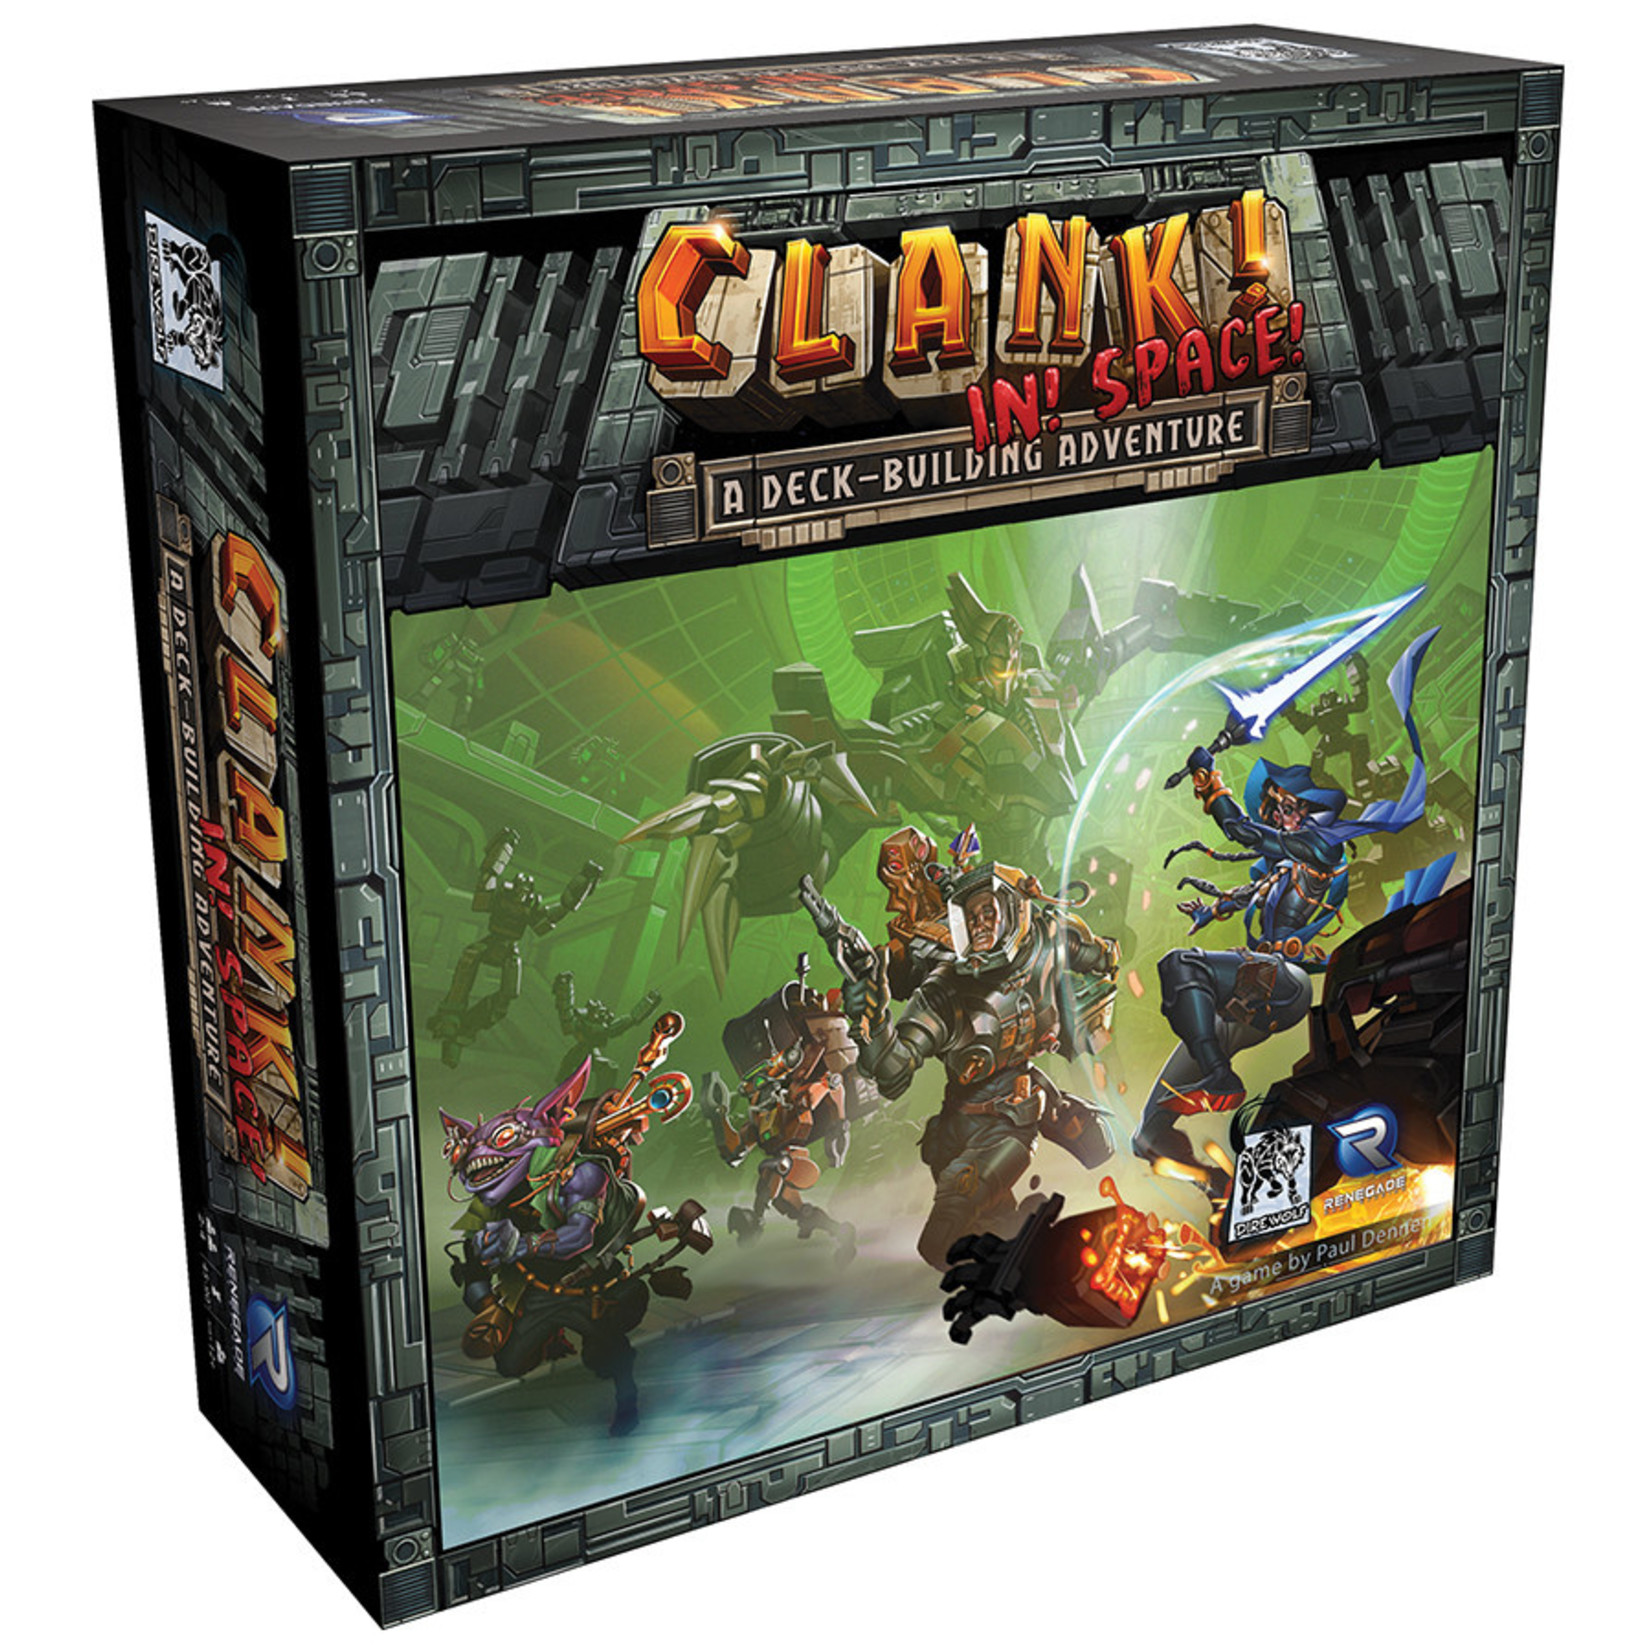 Renegade Clank! In! Space! A Deck-Building Adventure